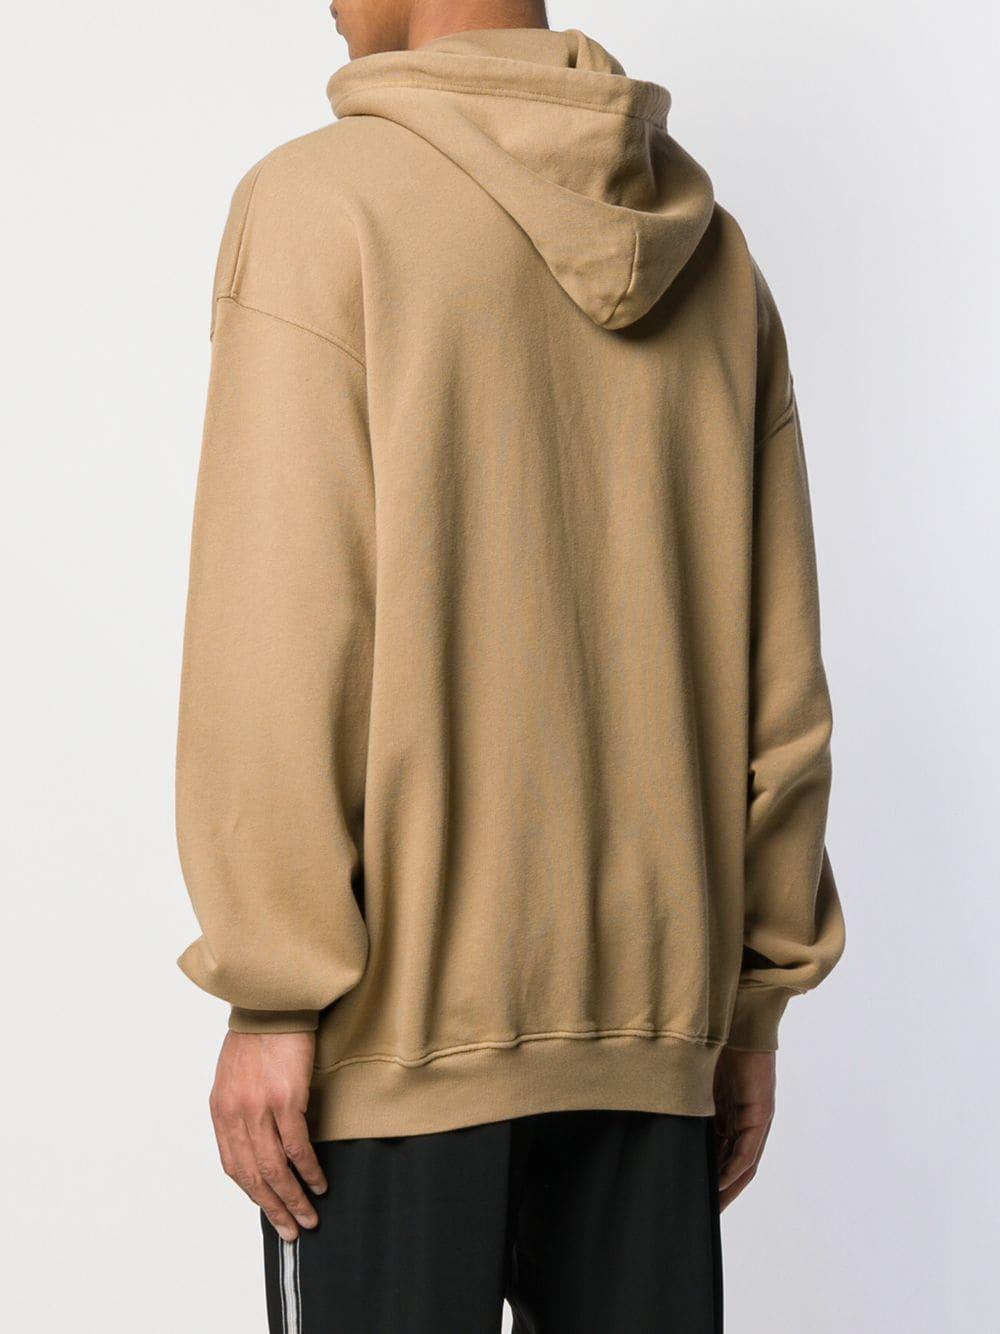 Balenciaga Cotton Bb Hoodie in Beige (Natural) for Men - Save 24% - Lyst